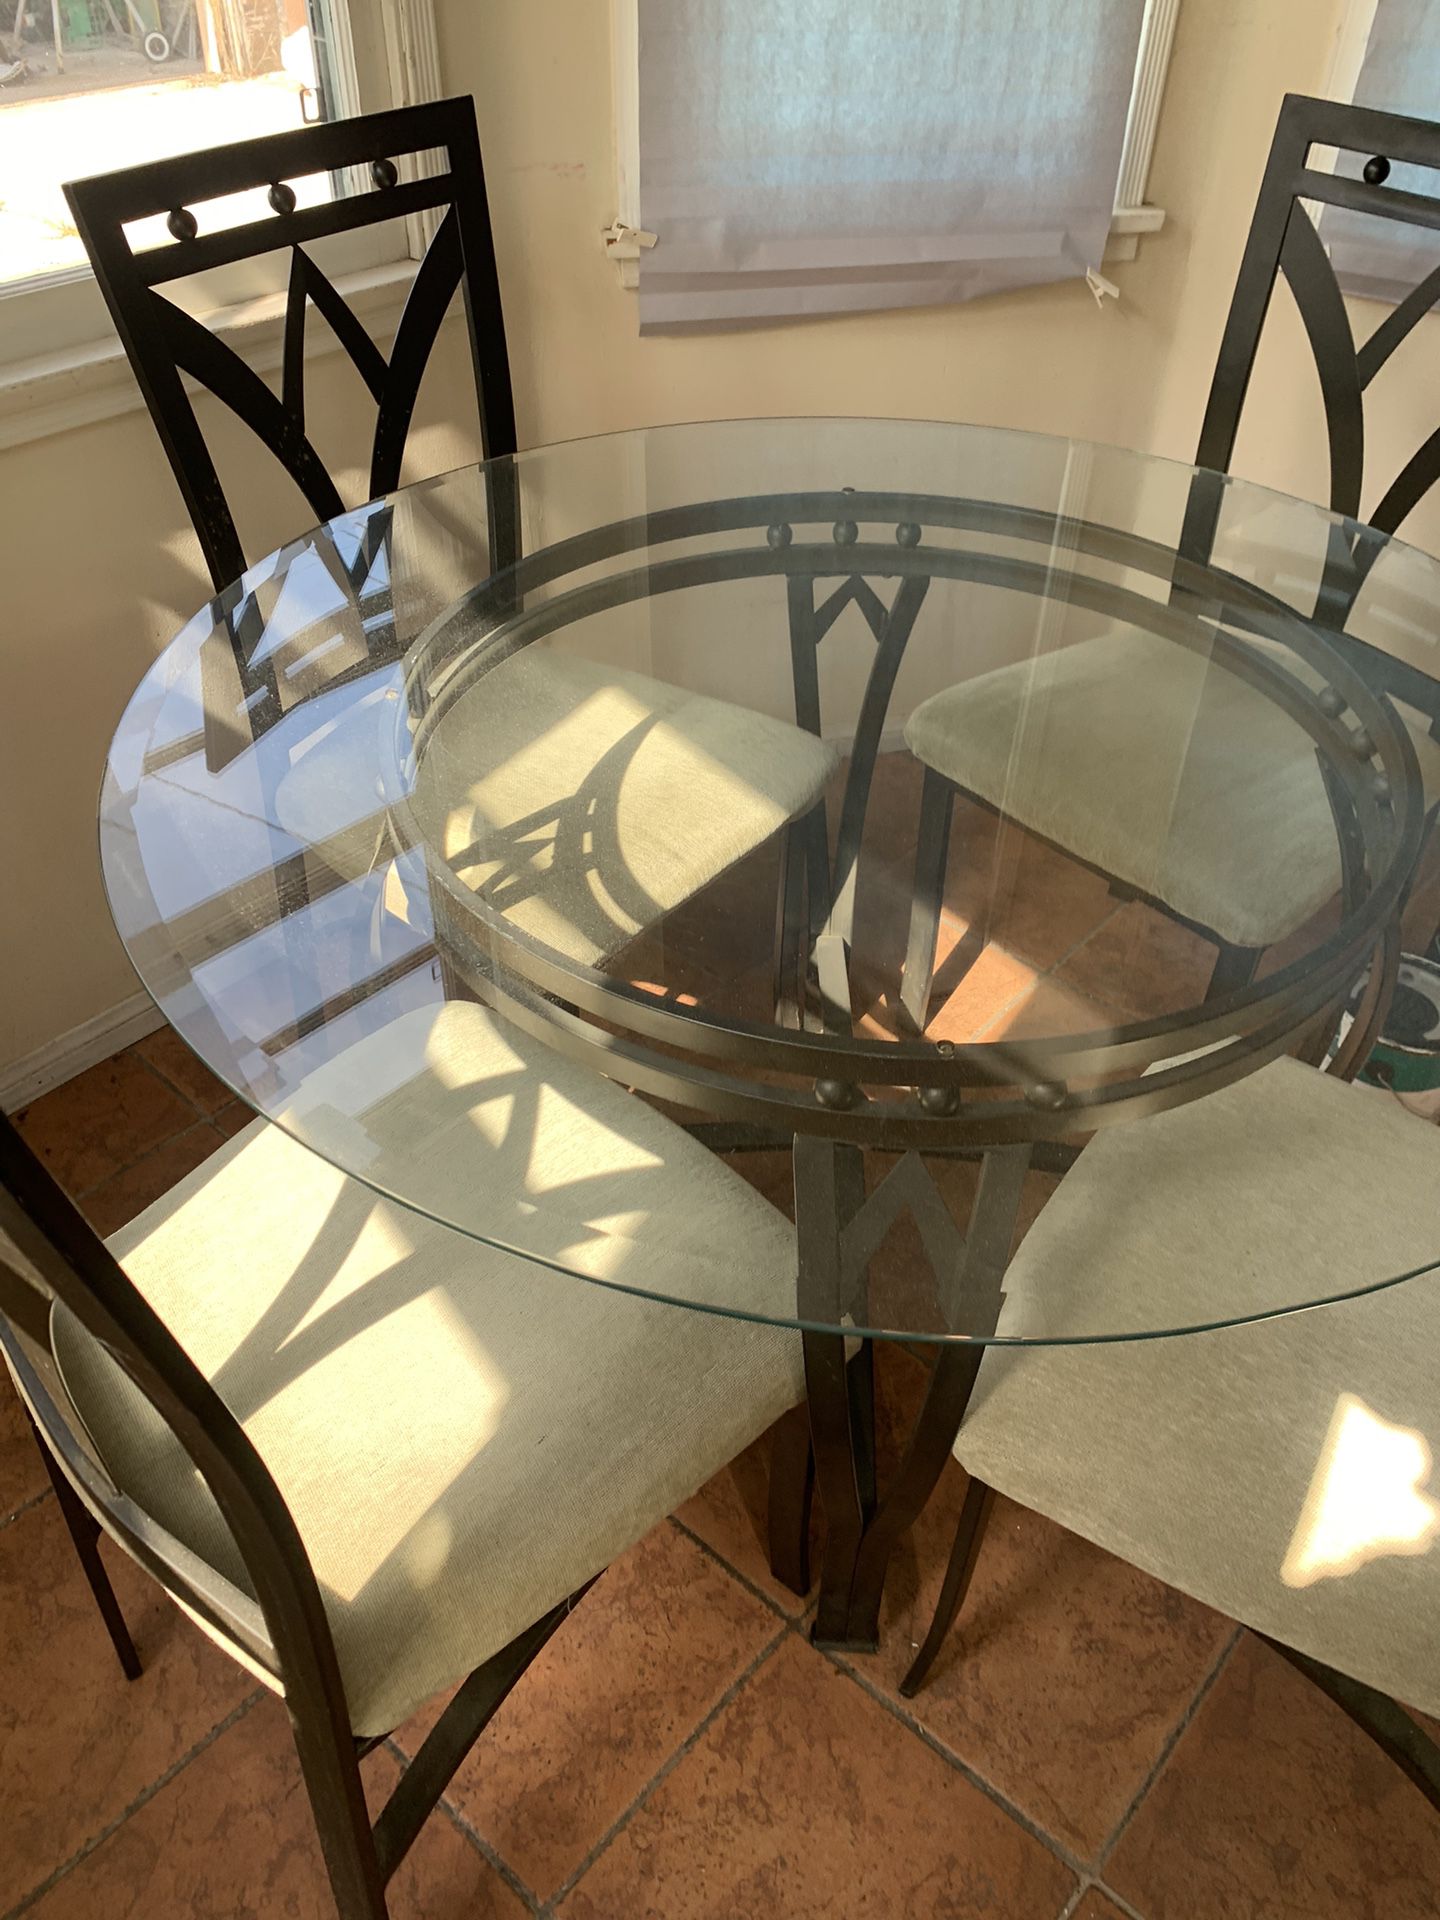 Circular Glass Breakfast Table With 4 Chairs